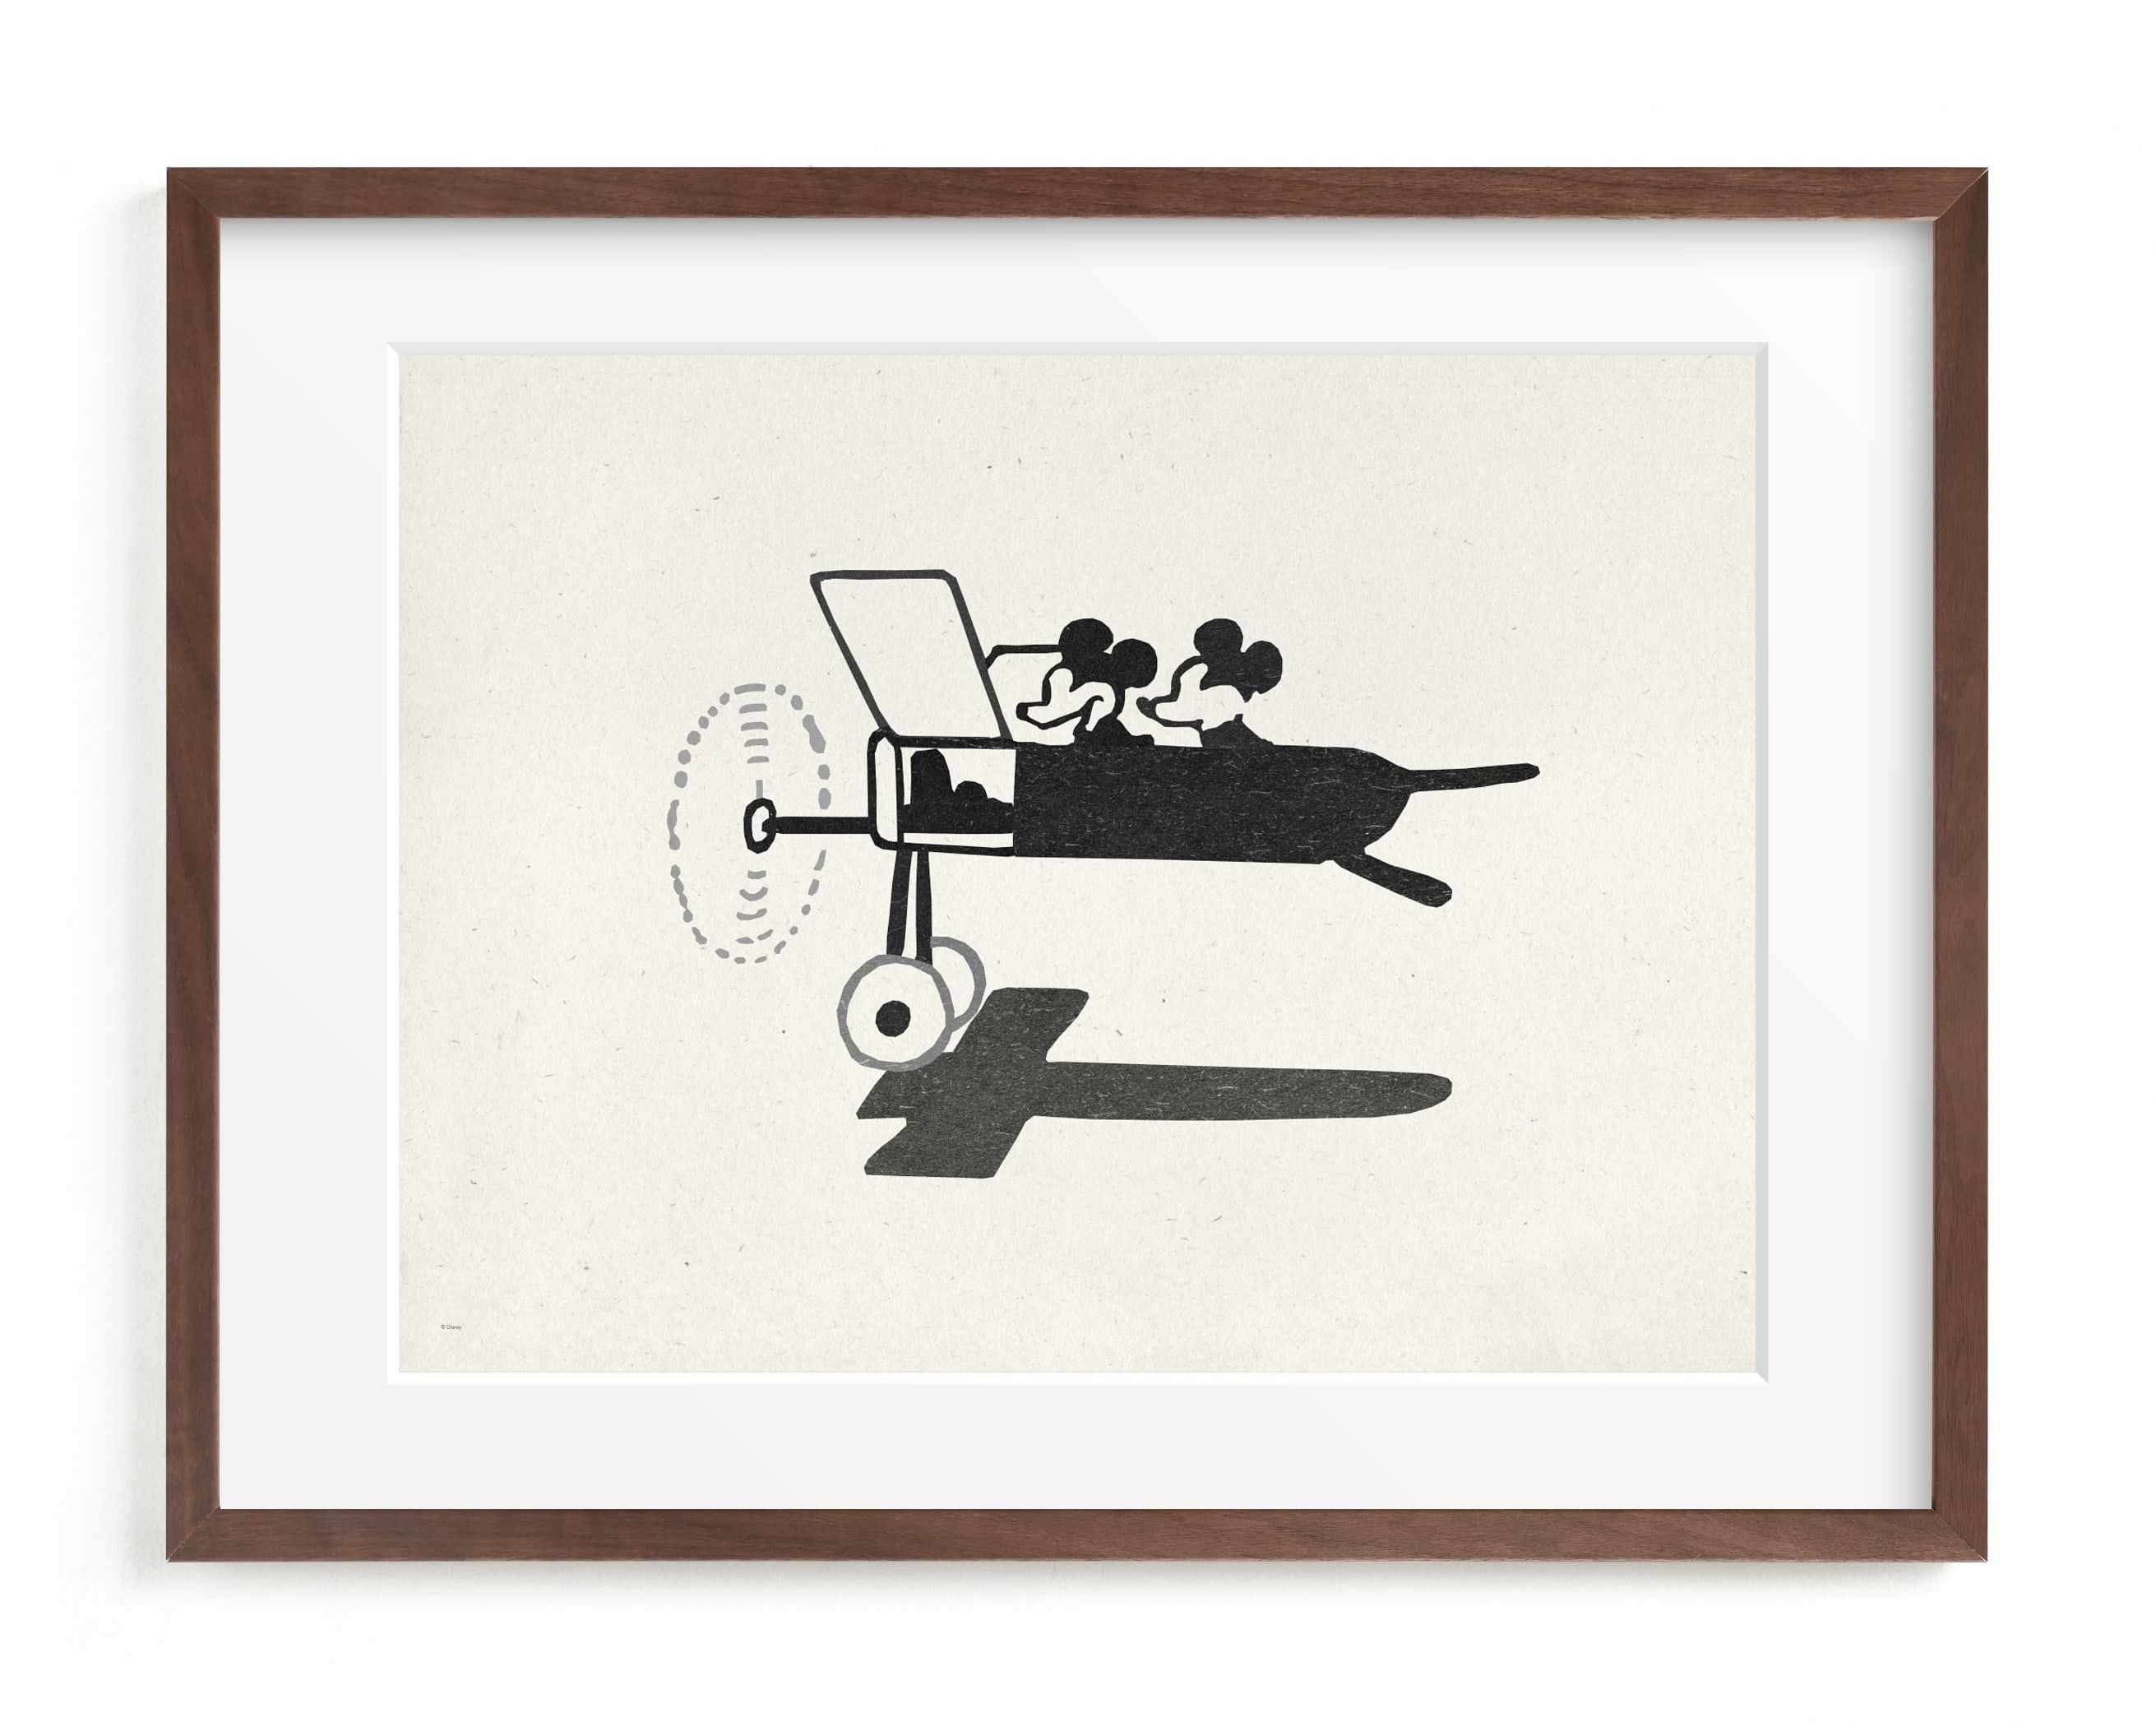 "Mickey and Minnie on the plane" - Limited Edition Art Print by Sumak Studio. | Minted